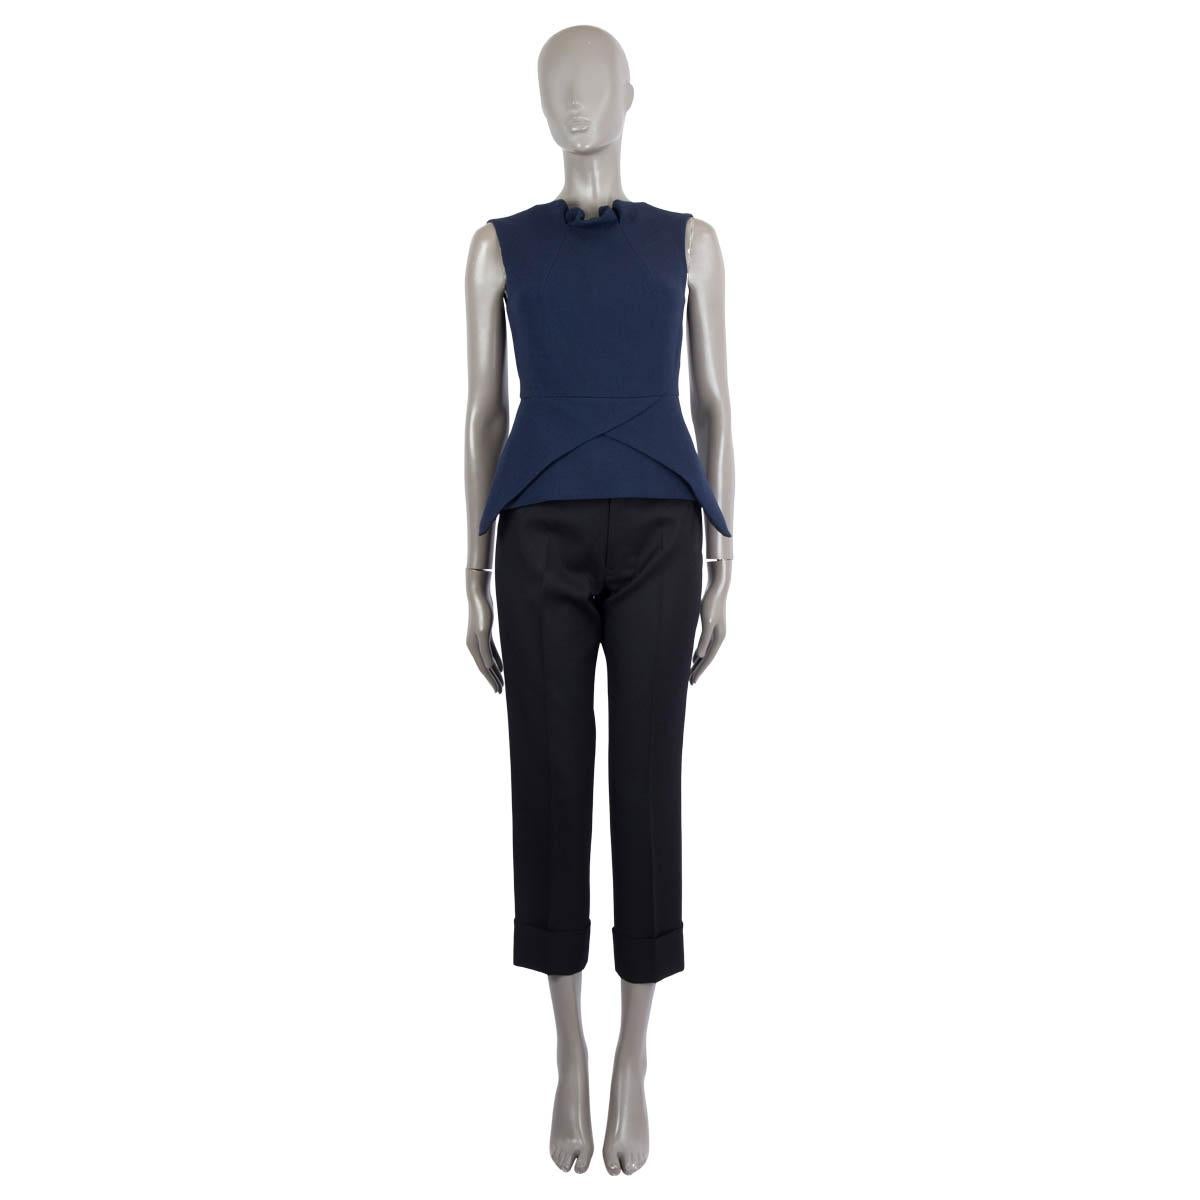 100% authentic Roland Mouret sleeveless structured top in navy blue wool (100%). Opens with a zipper on the back and is lined in black silk (26%), acetate (71%) and elastane (3%). Has been worn and is in excellent condition. 

Measurements
Tag